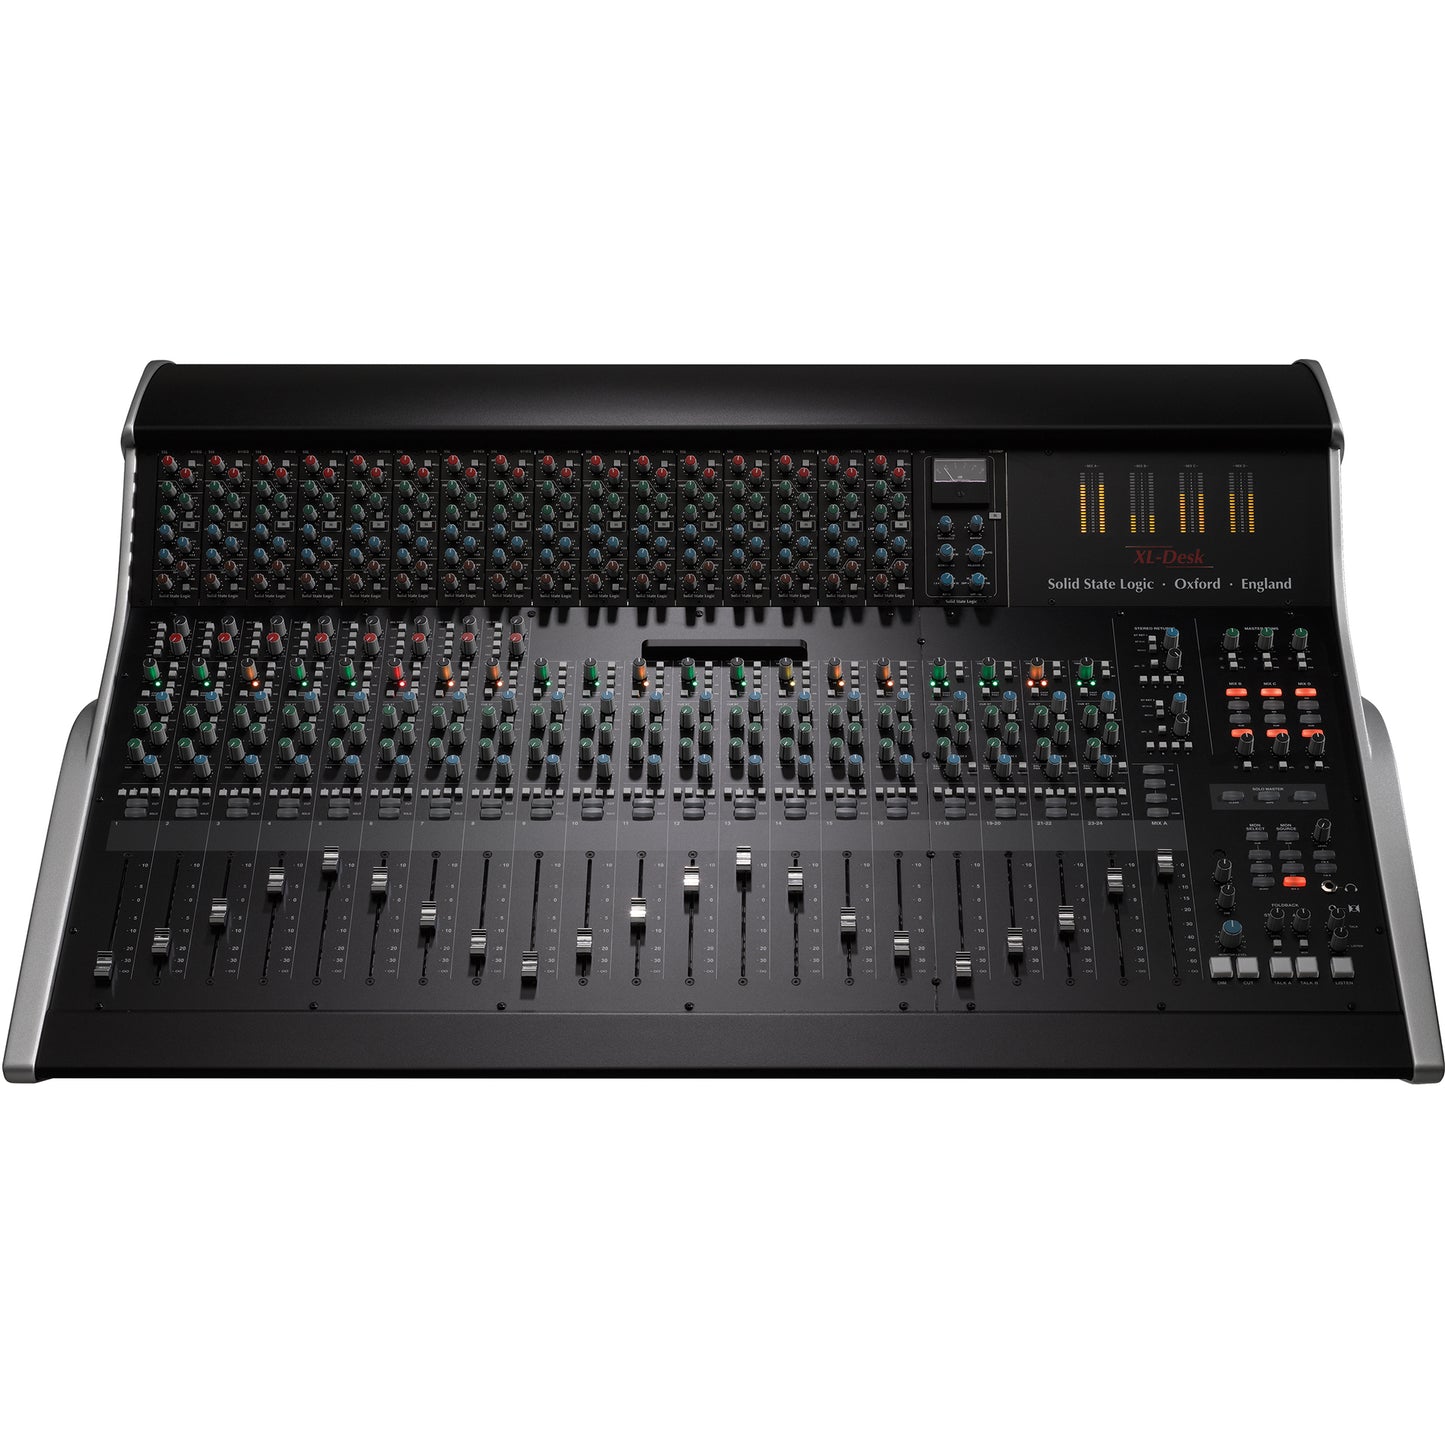 Solid State Logic XL Desk Full Super Analogue Mixer